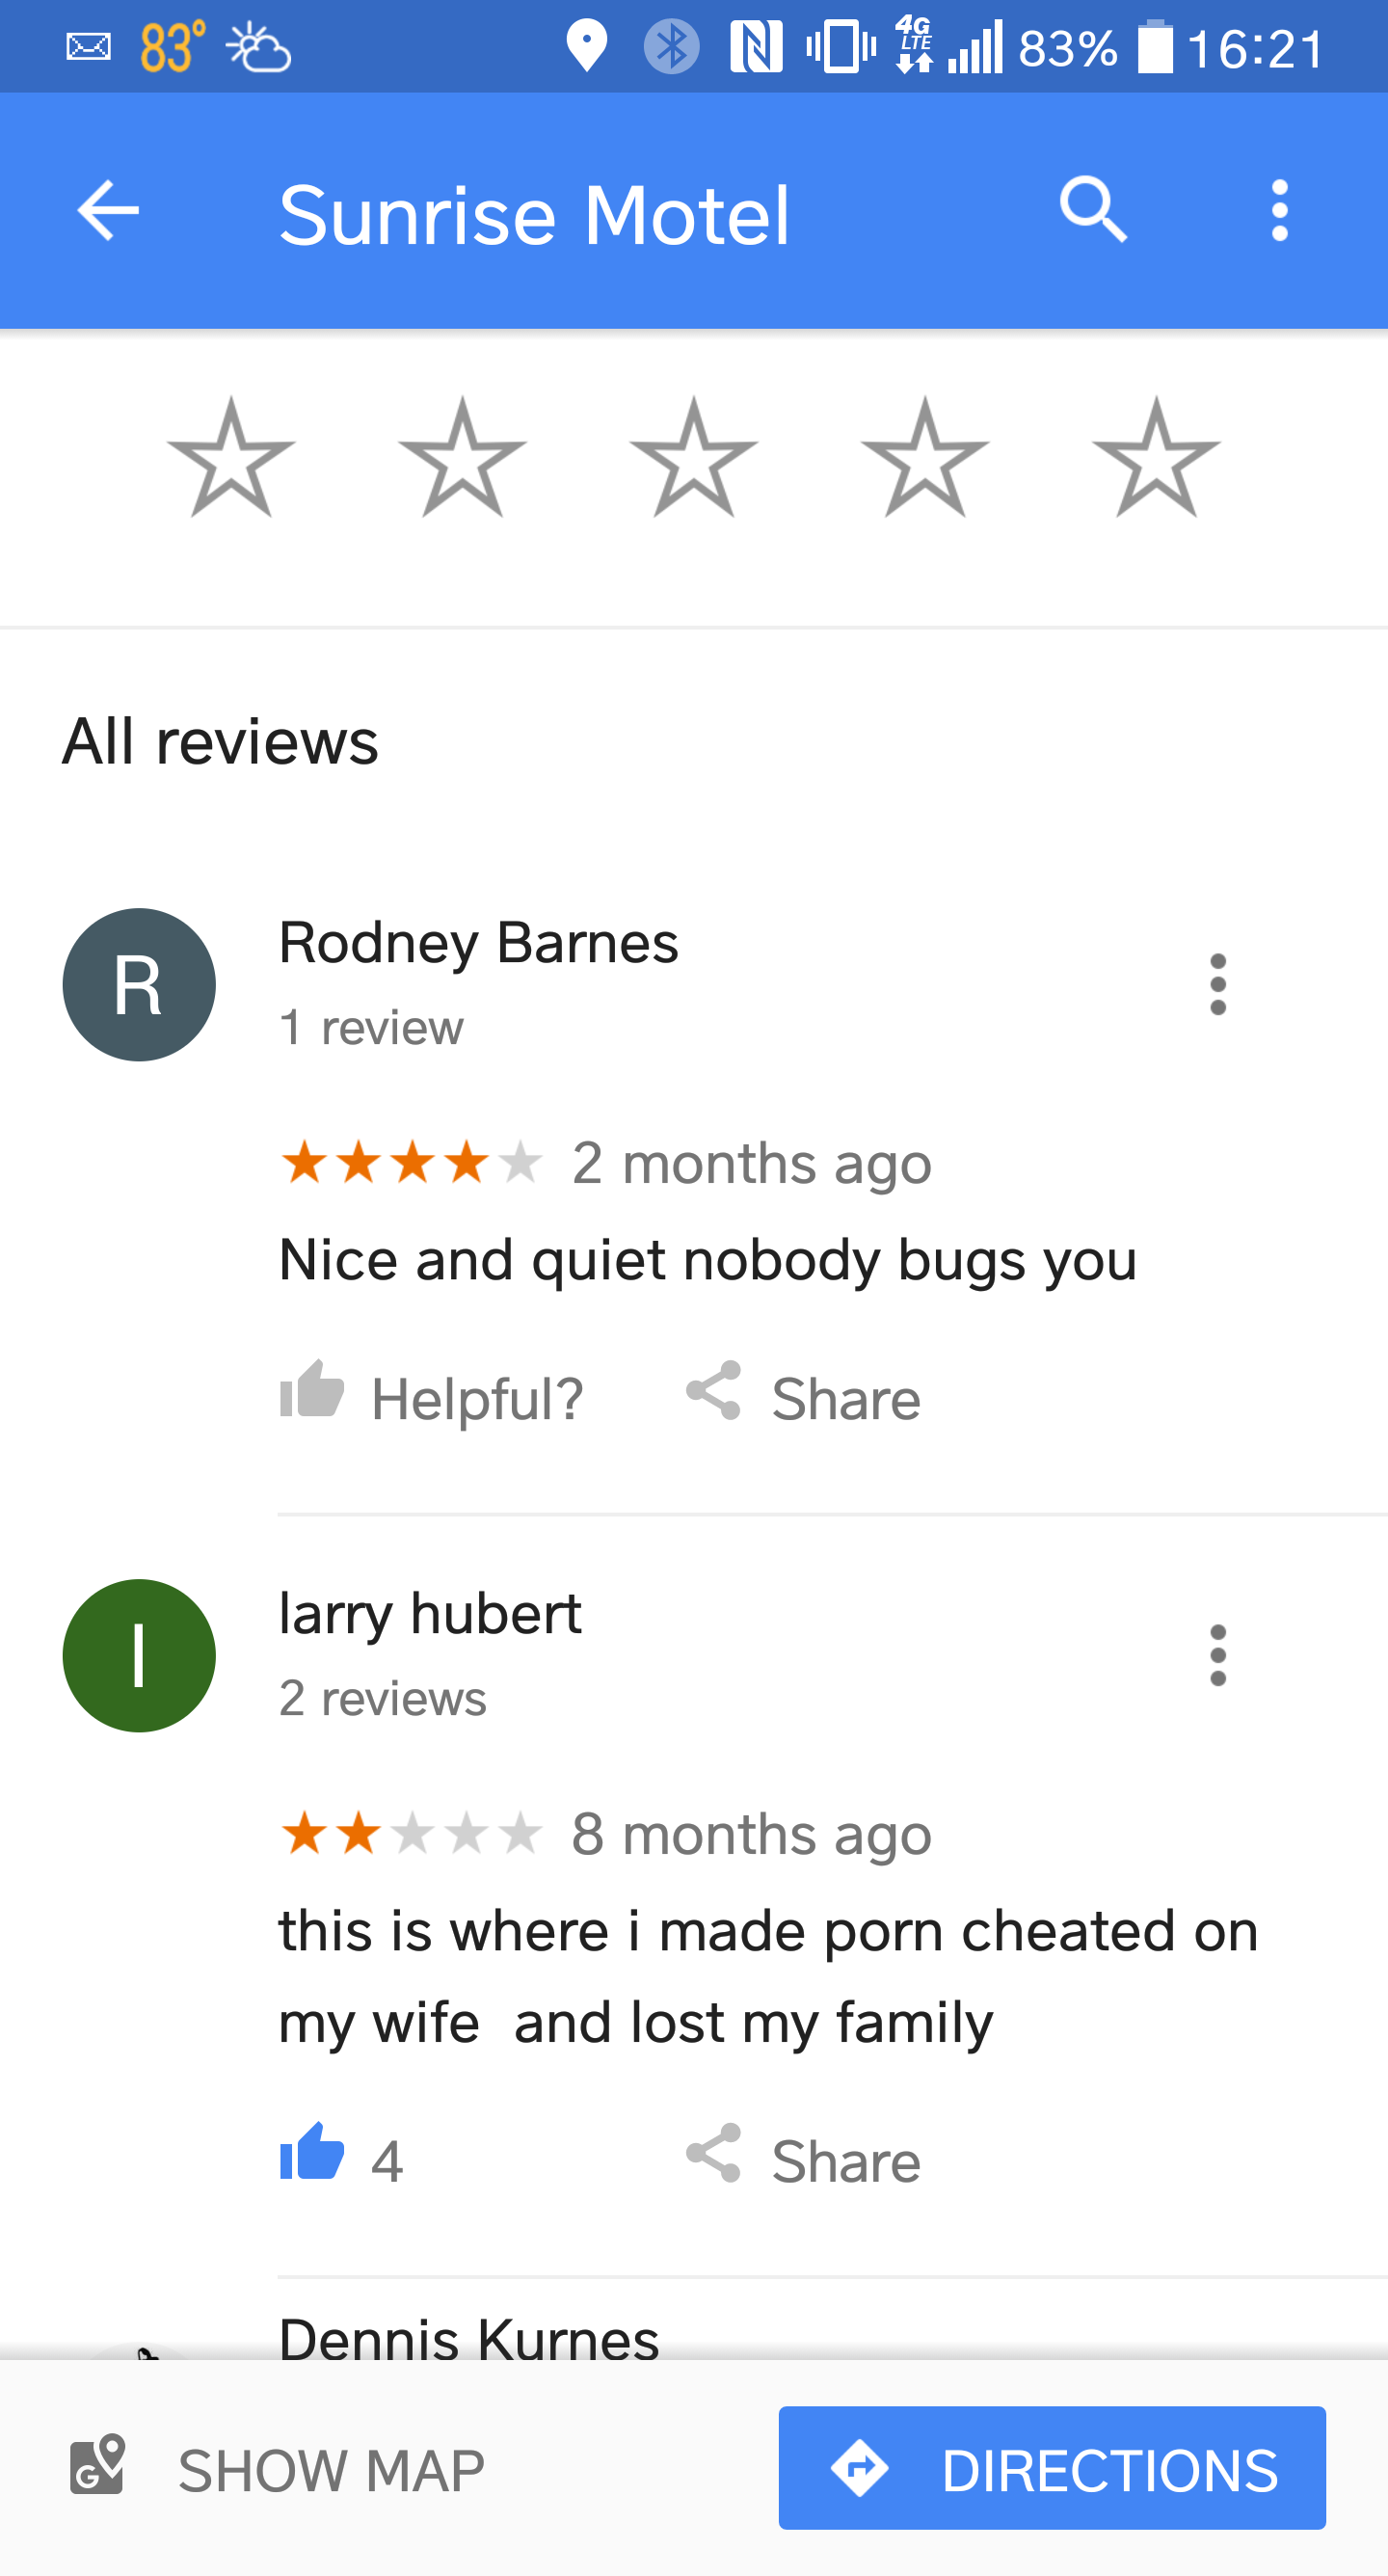 The best 2 star hotel review in Kansas.